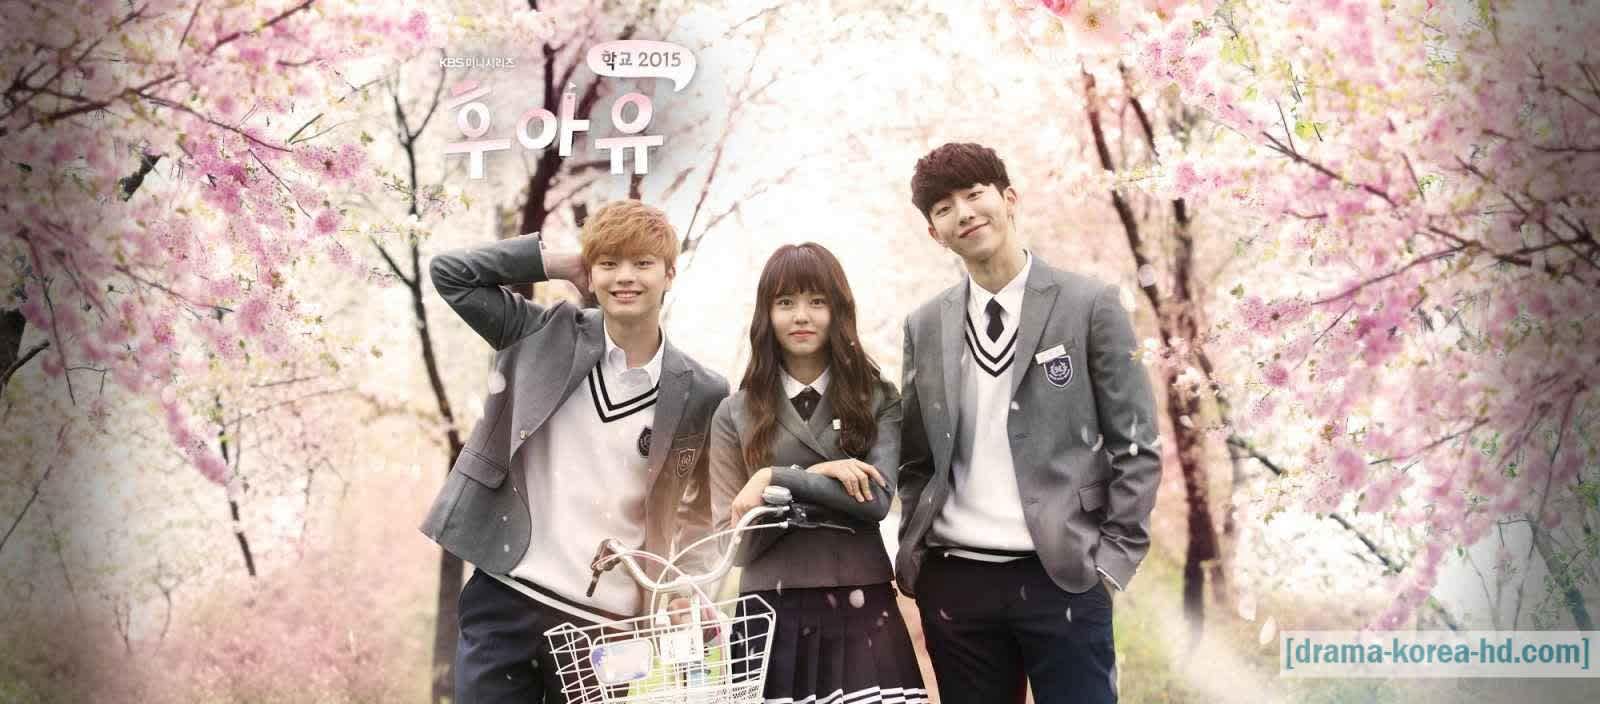 Who Are You School 2015 Download